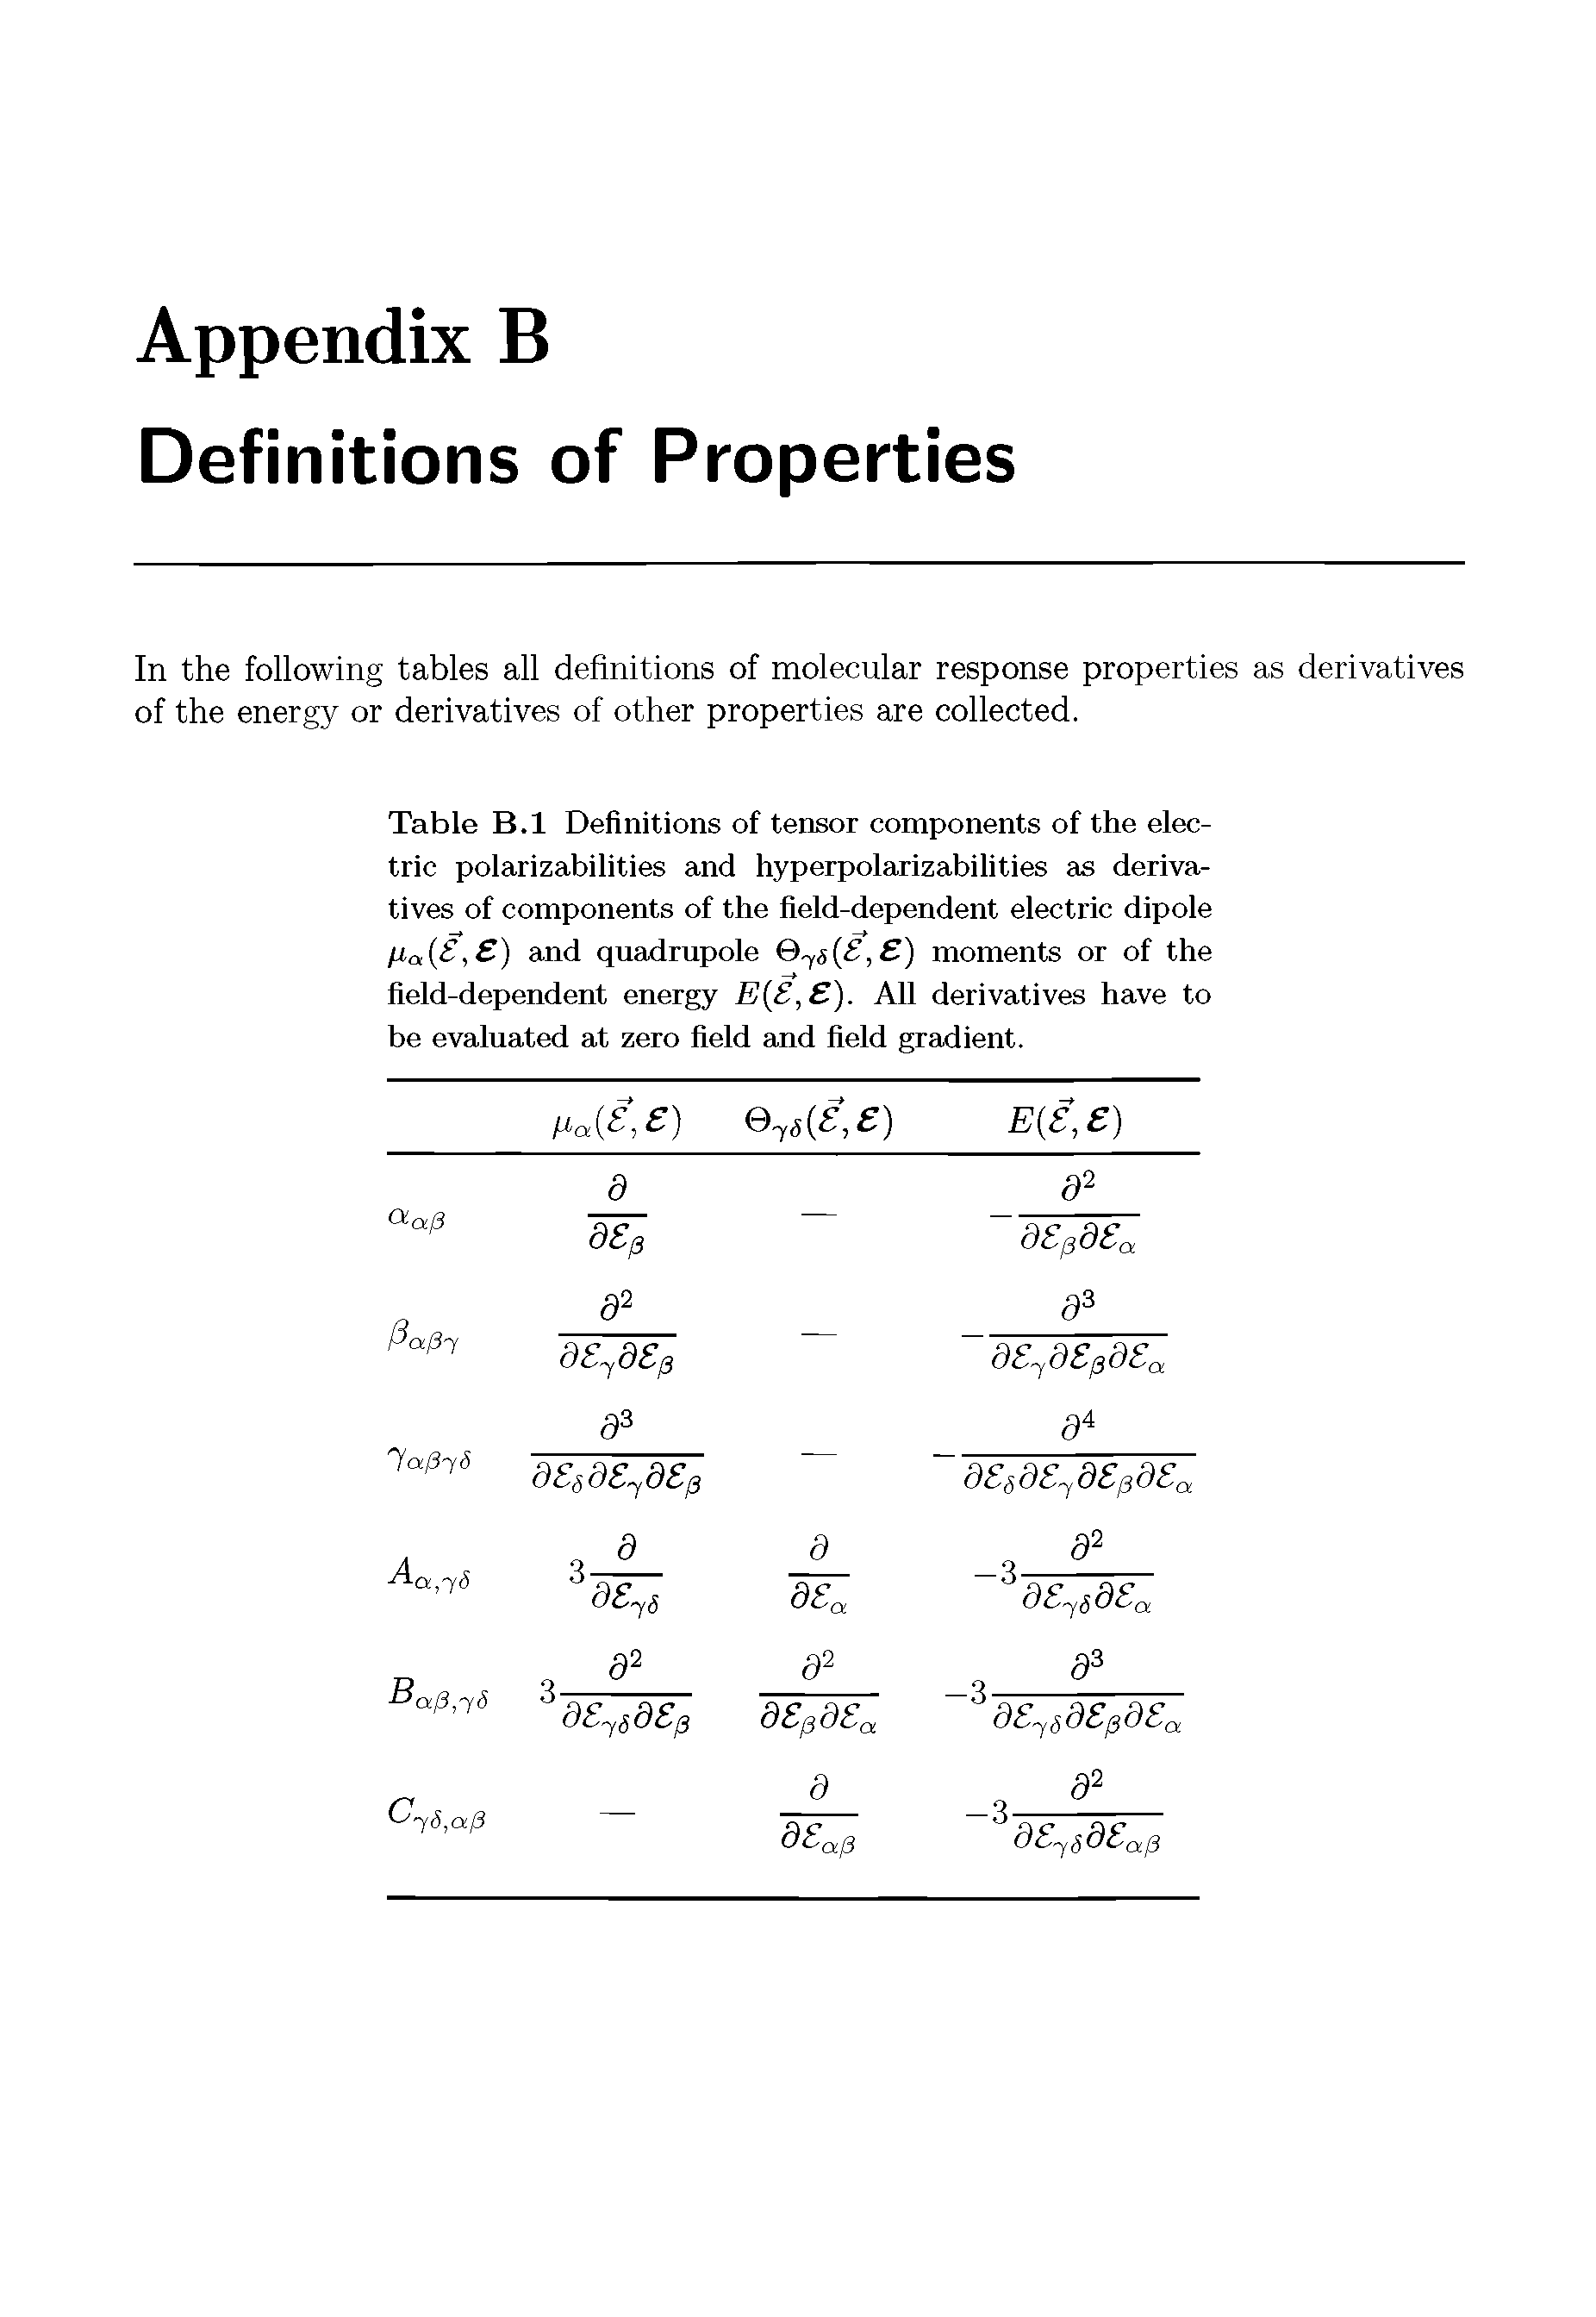 Table B.l Definitions of tensor components of the electric polarizabilities and hyperpolarizabilities as derivatives of components of the field-dependent electric dipole Ha S,S) and quadrupole Qji(S, ) moments or of the field-dependent energy E , ). All derivatives have to be evaluated at zero field and field gradient.